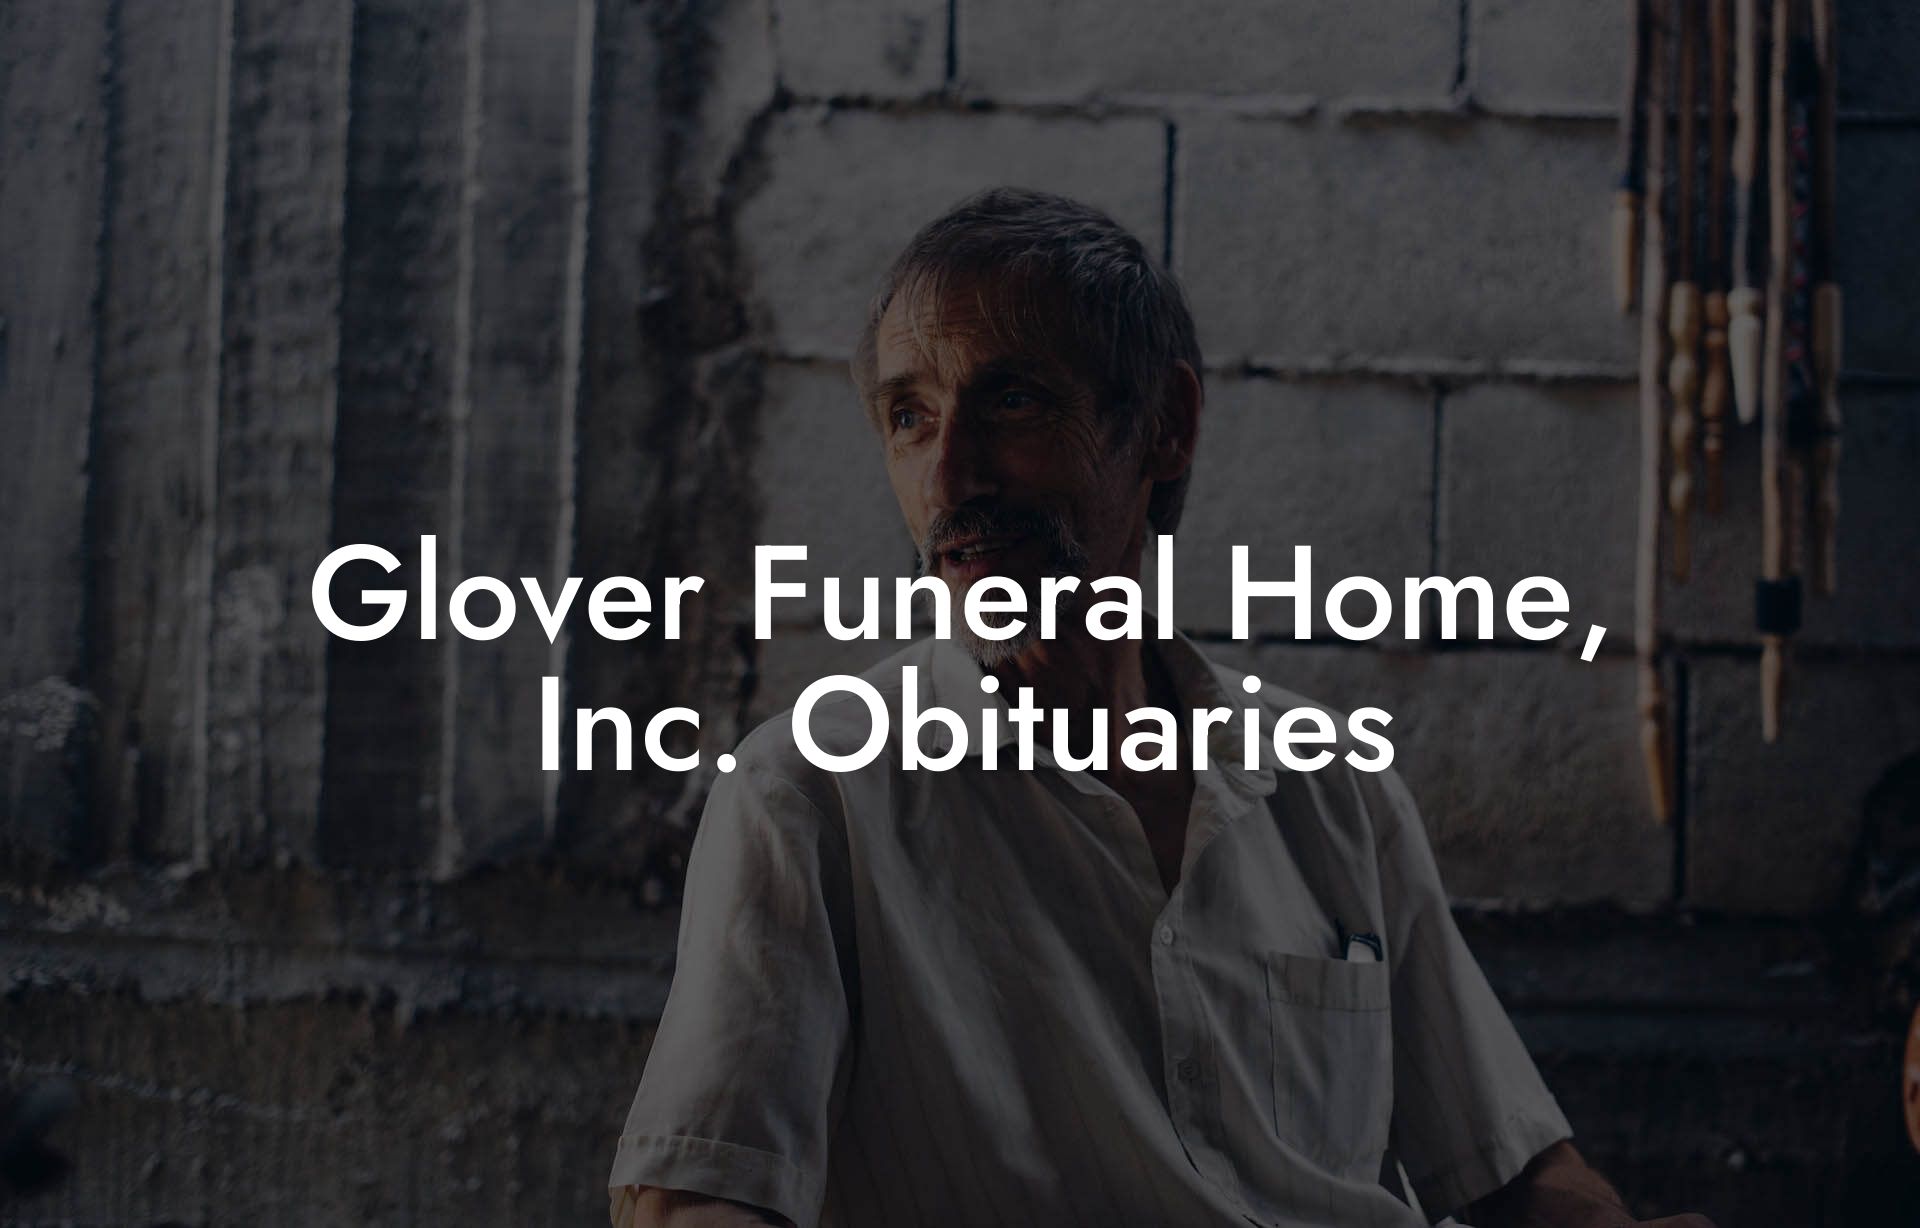 Glover Funeral Home, Inc. Obituaries